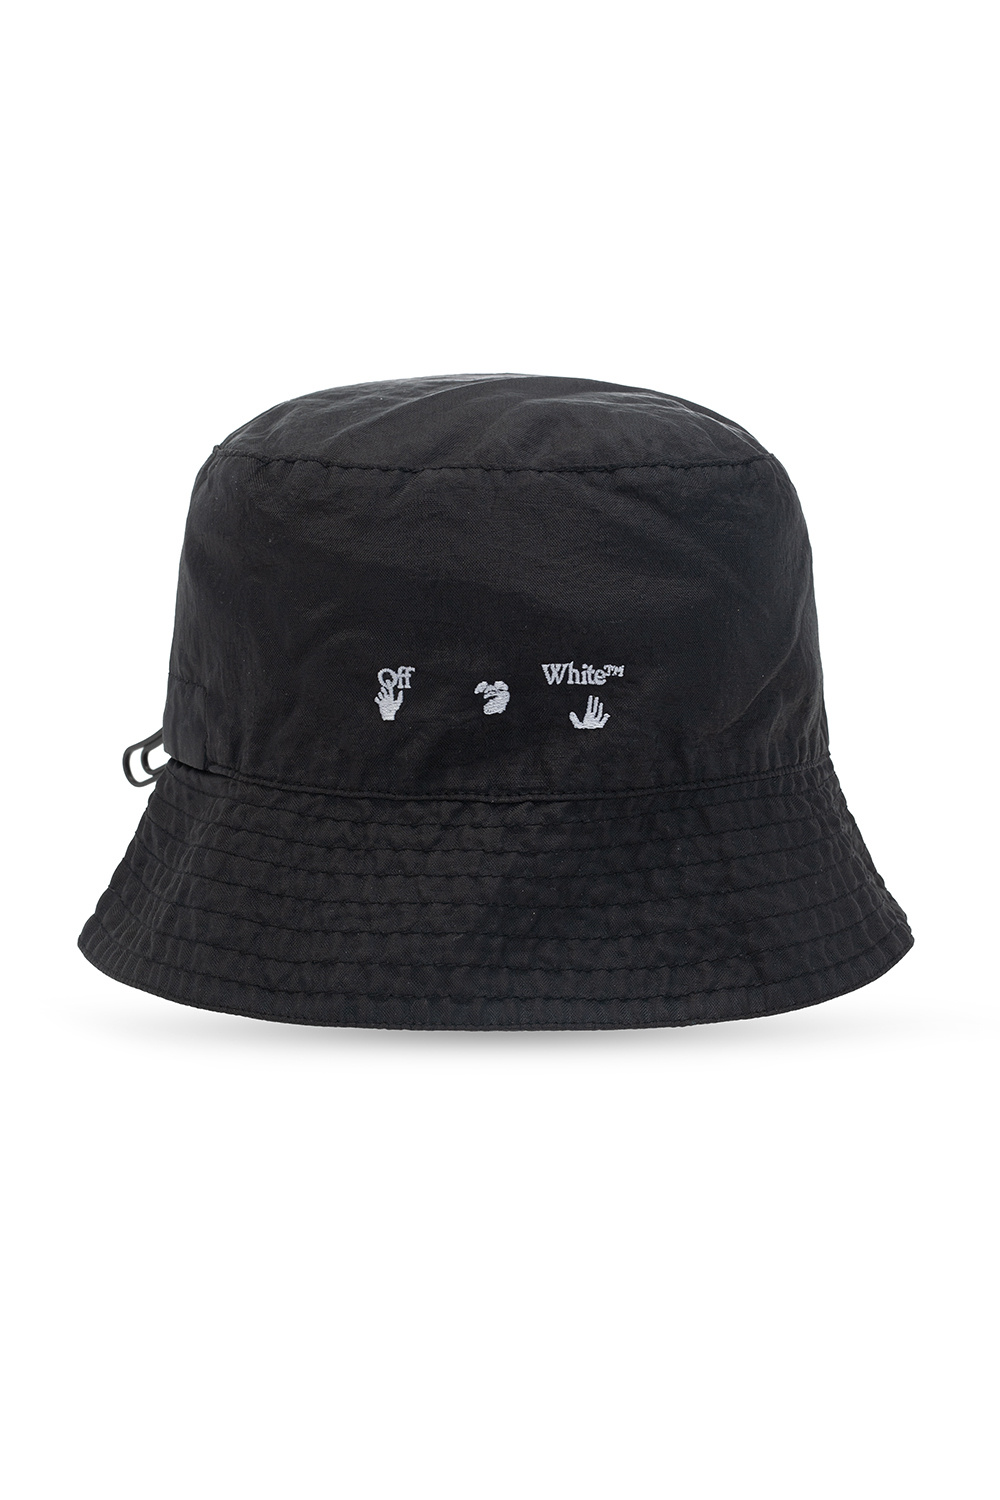 Off-White hat repeat with logo